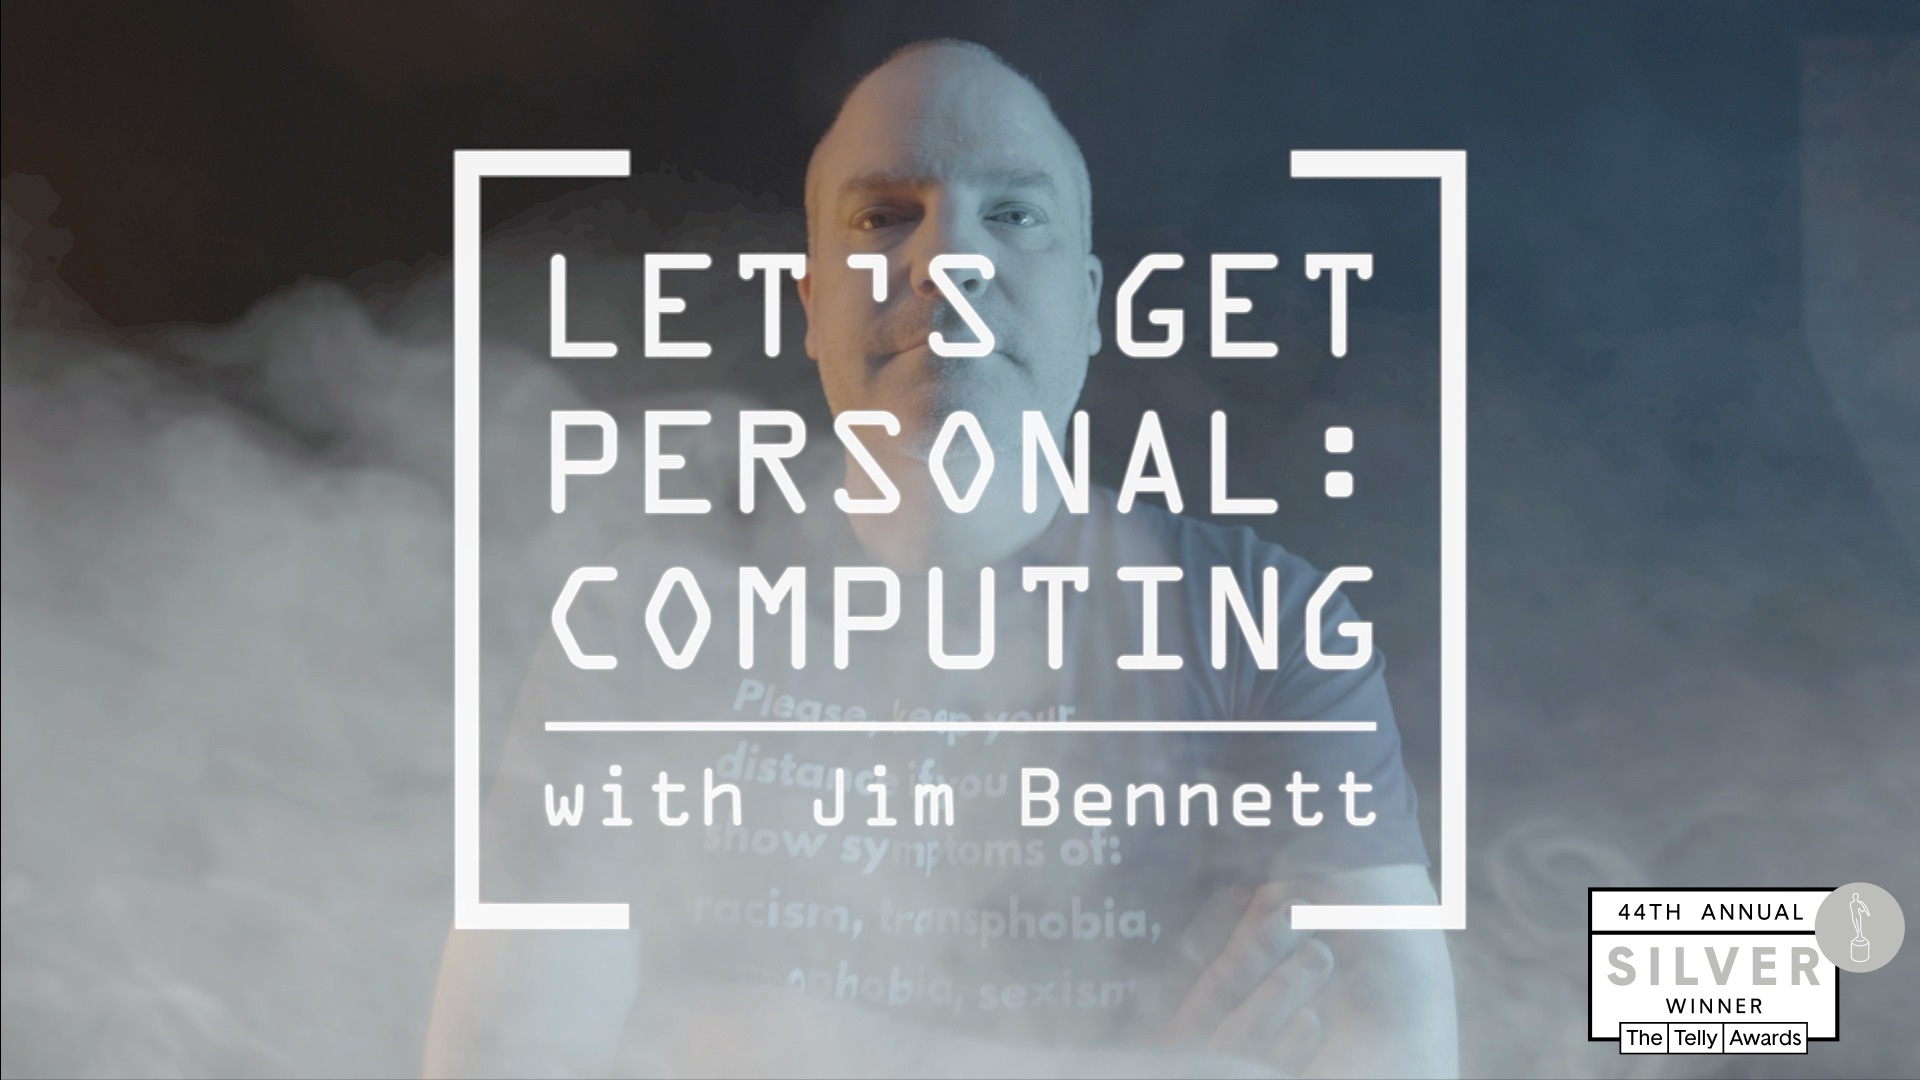 Let's get personal: Computing